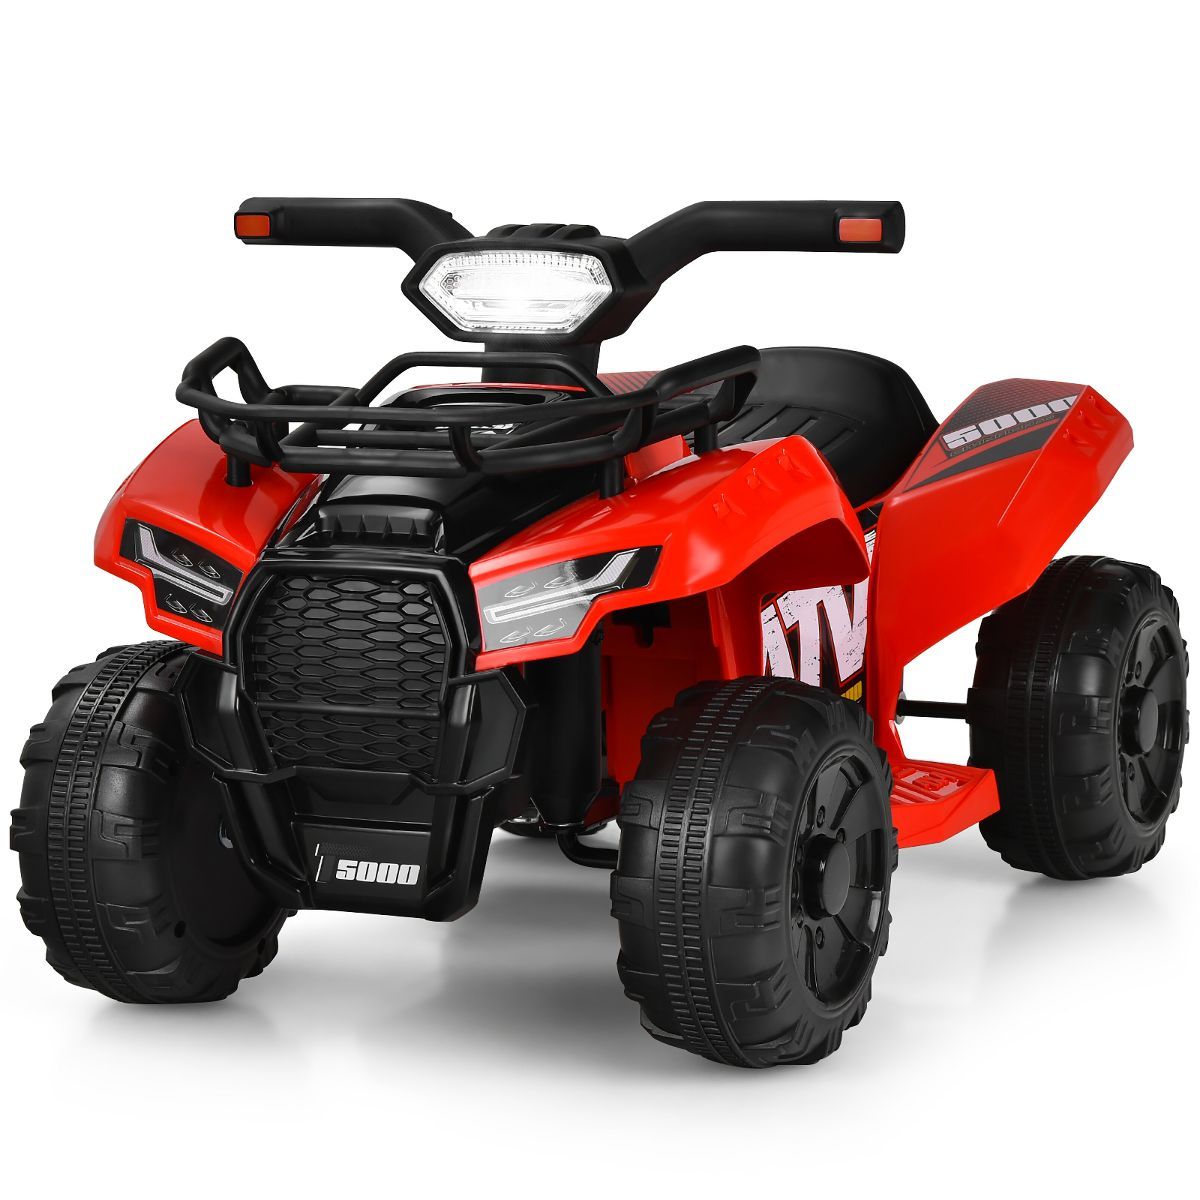 Costway 6V Kids ATV Quad Electric Ride On Car Toy Toddler with LED Light MP3 | Target